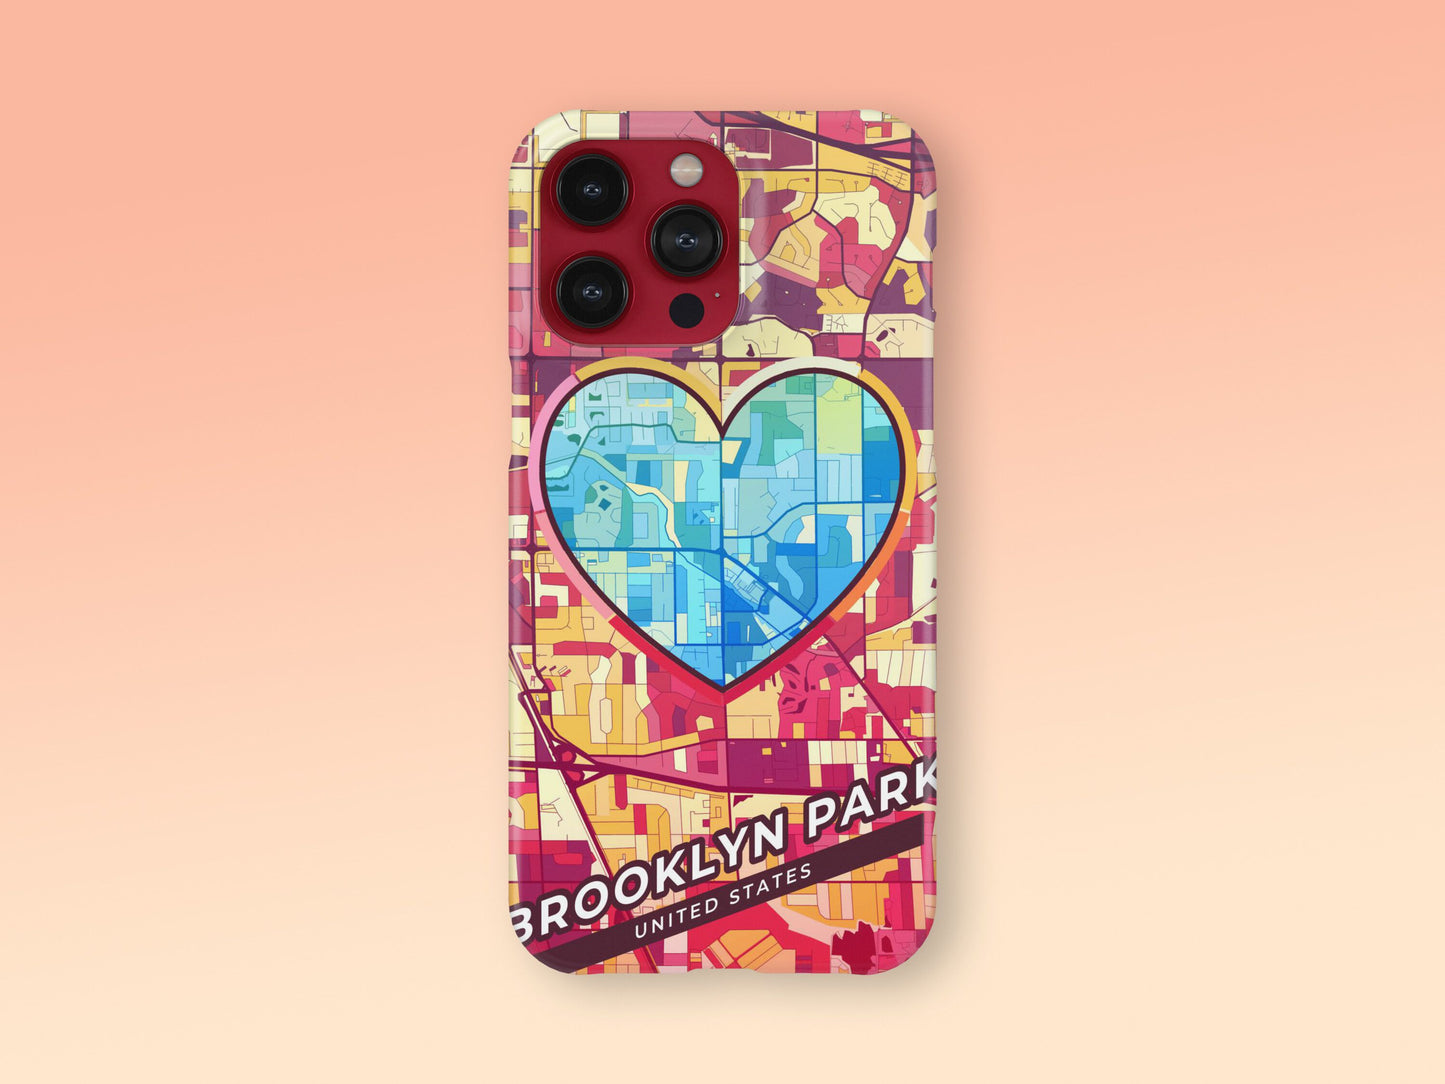 Brooklyn Park Minnesota slim phone case with colorful icon. Birthday, wedding or housewarming gift. Couple match cases. 2